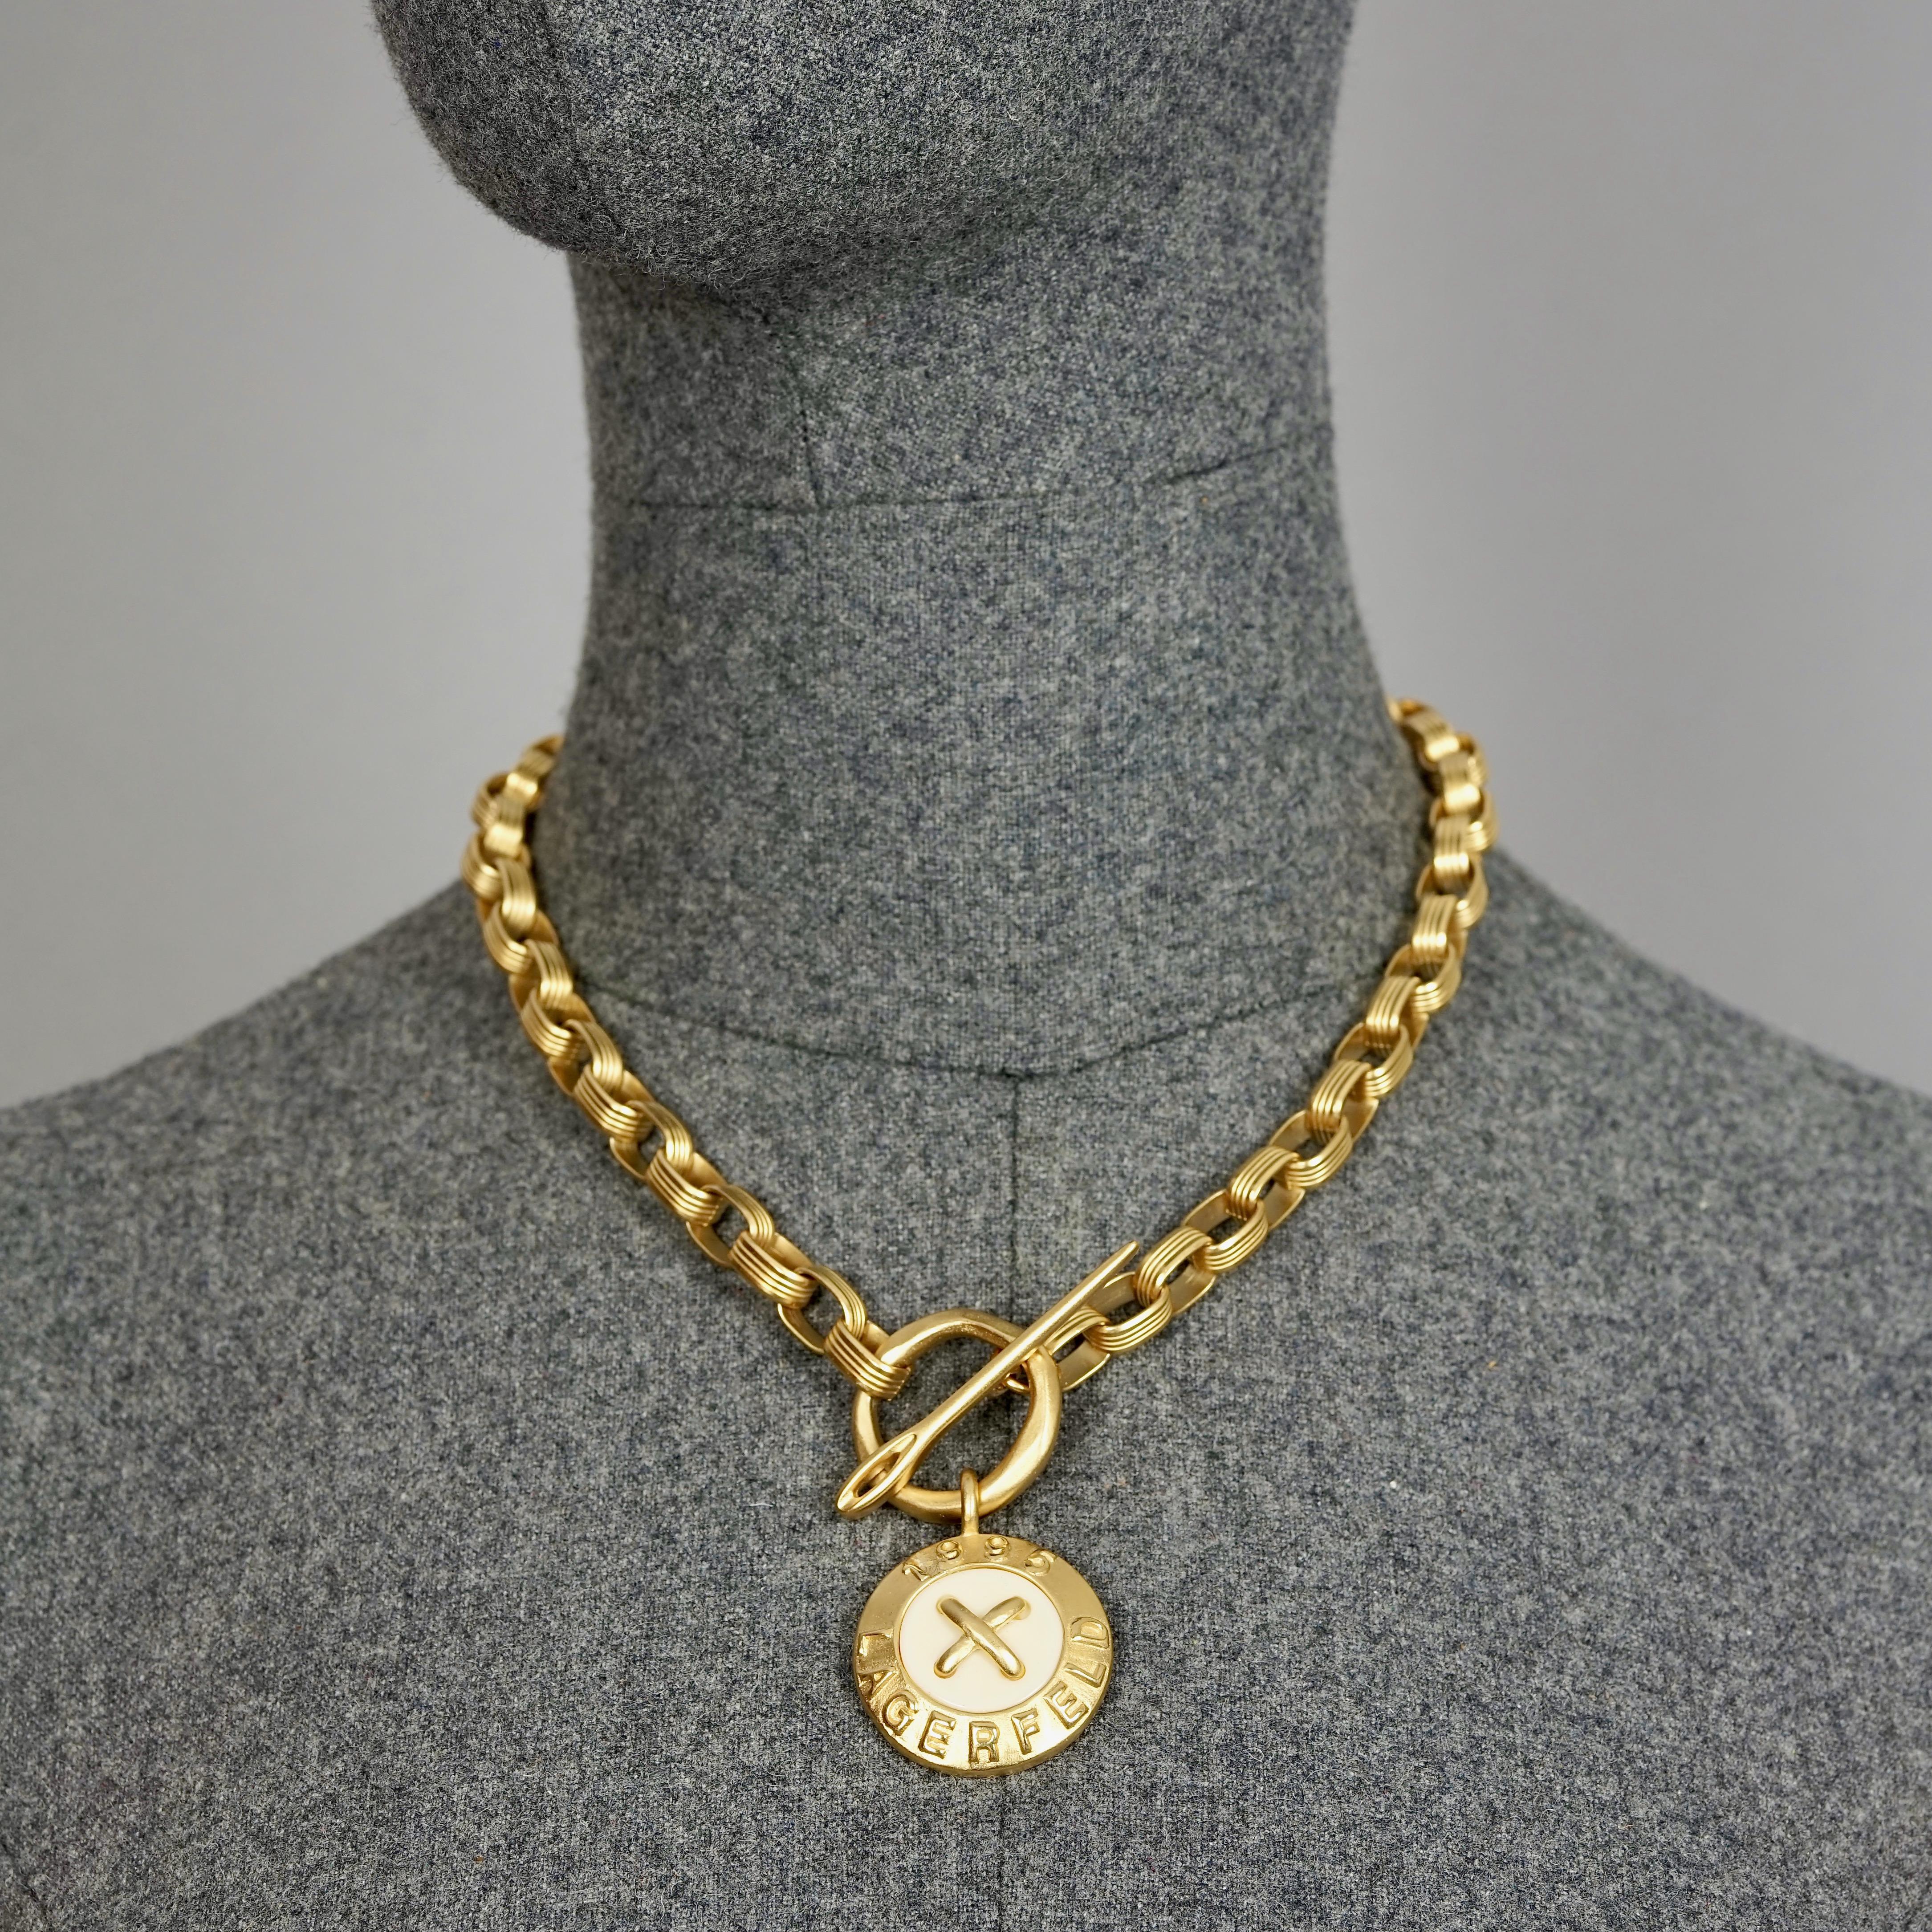 Vintage 1995 KARL LAGERFELD Logo Button and Needle Chain Necklace In Good Condition For Sale In Kingersheim, Alsace